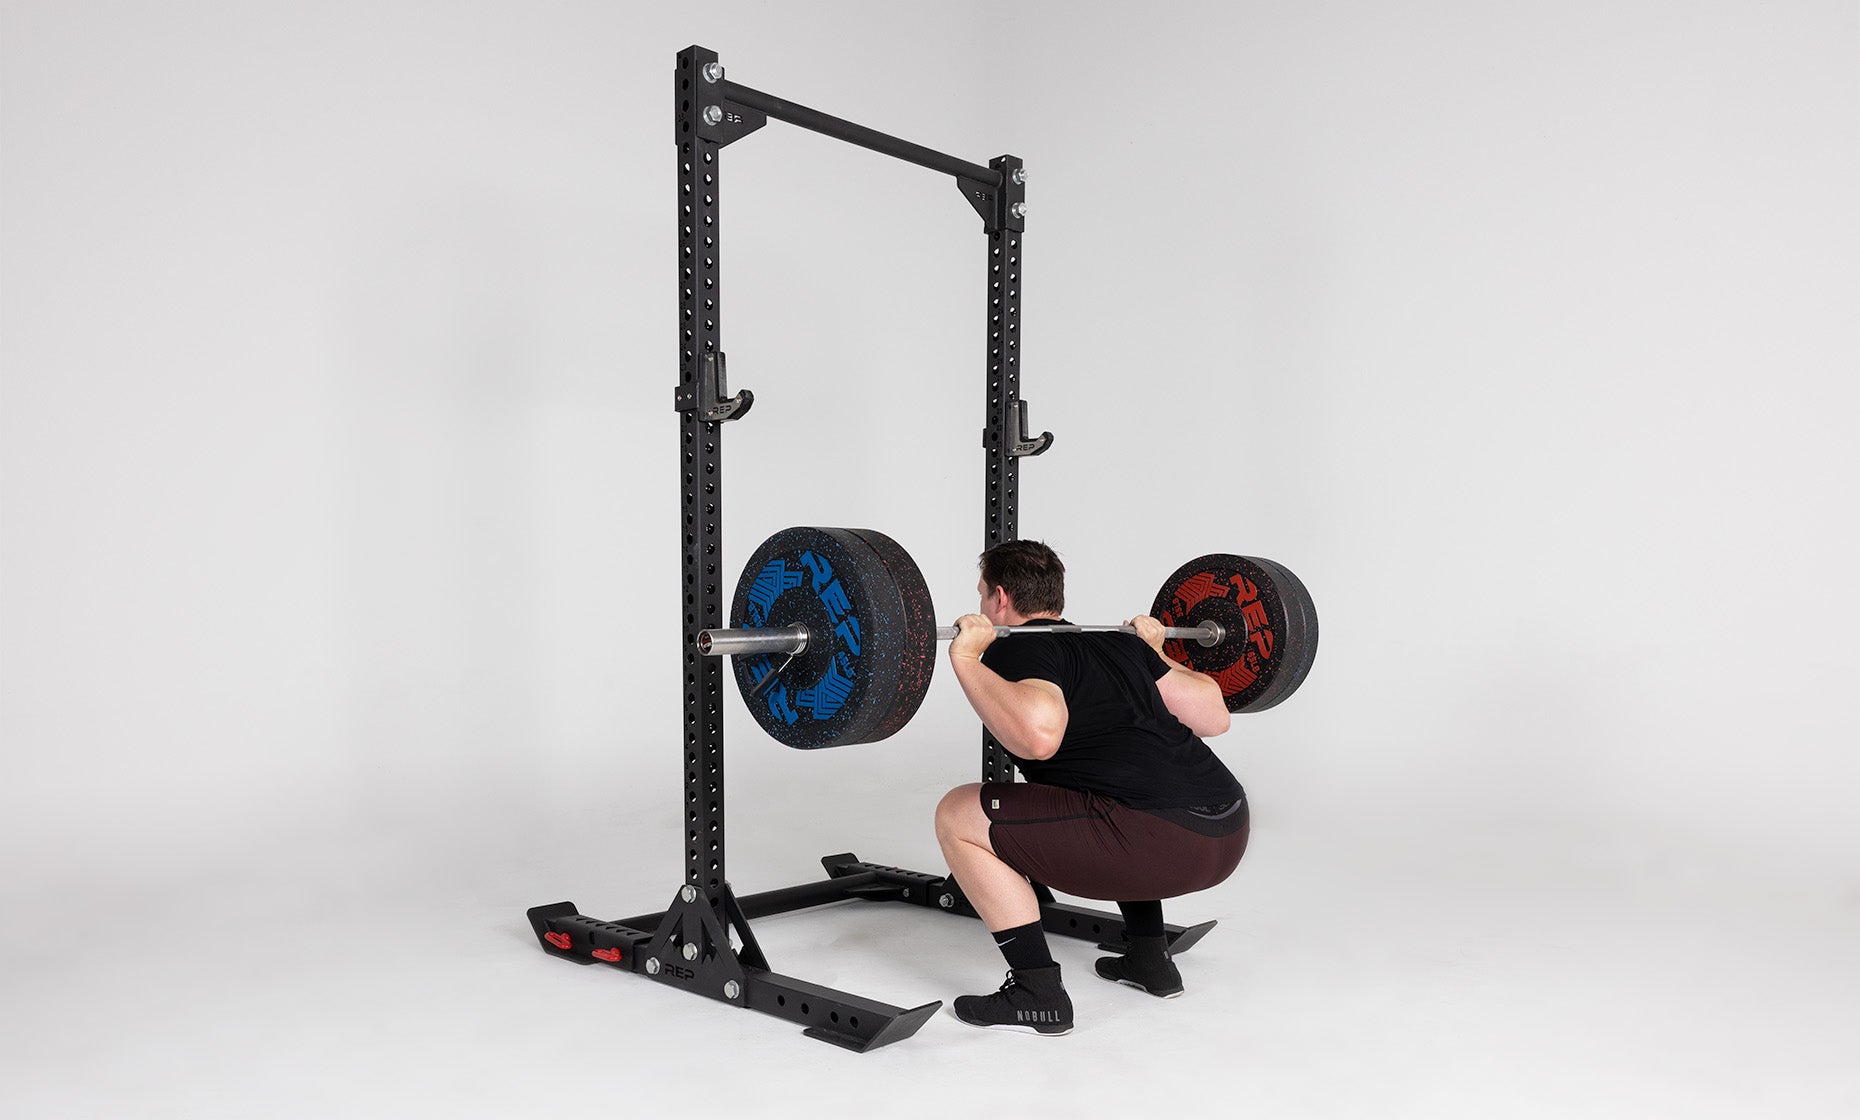 Oxylus Yoke with Pull-Up Bar Being Used As a Squat Rack